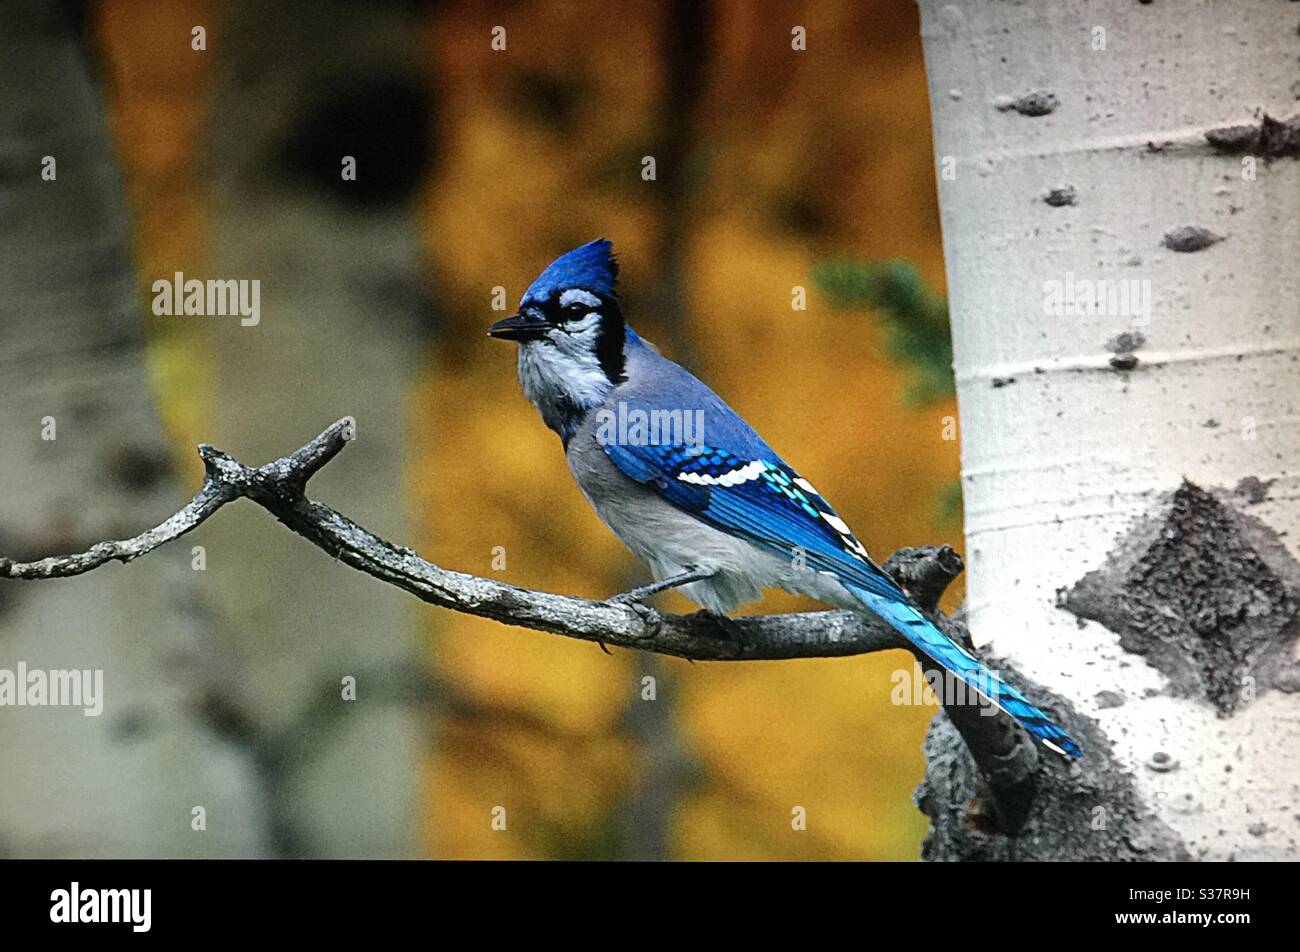 North American Birds, Birds of North America , Blue jay, bird, nature, woods, forest, feathers, flight, lover Stock Photo - Alamy